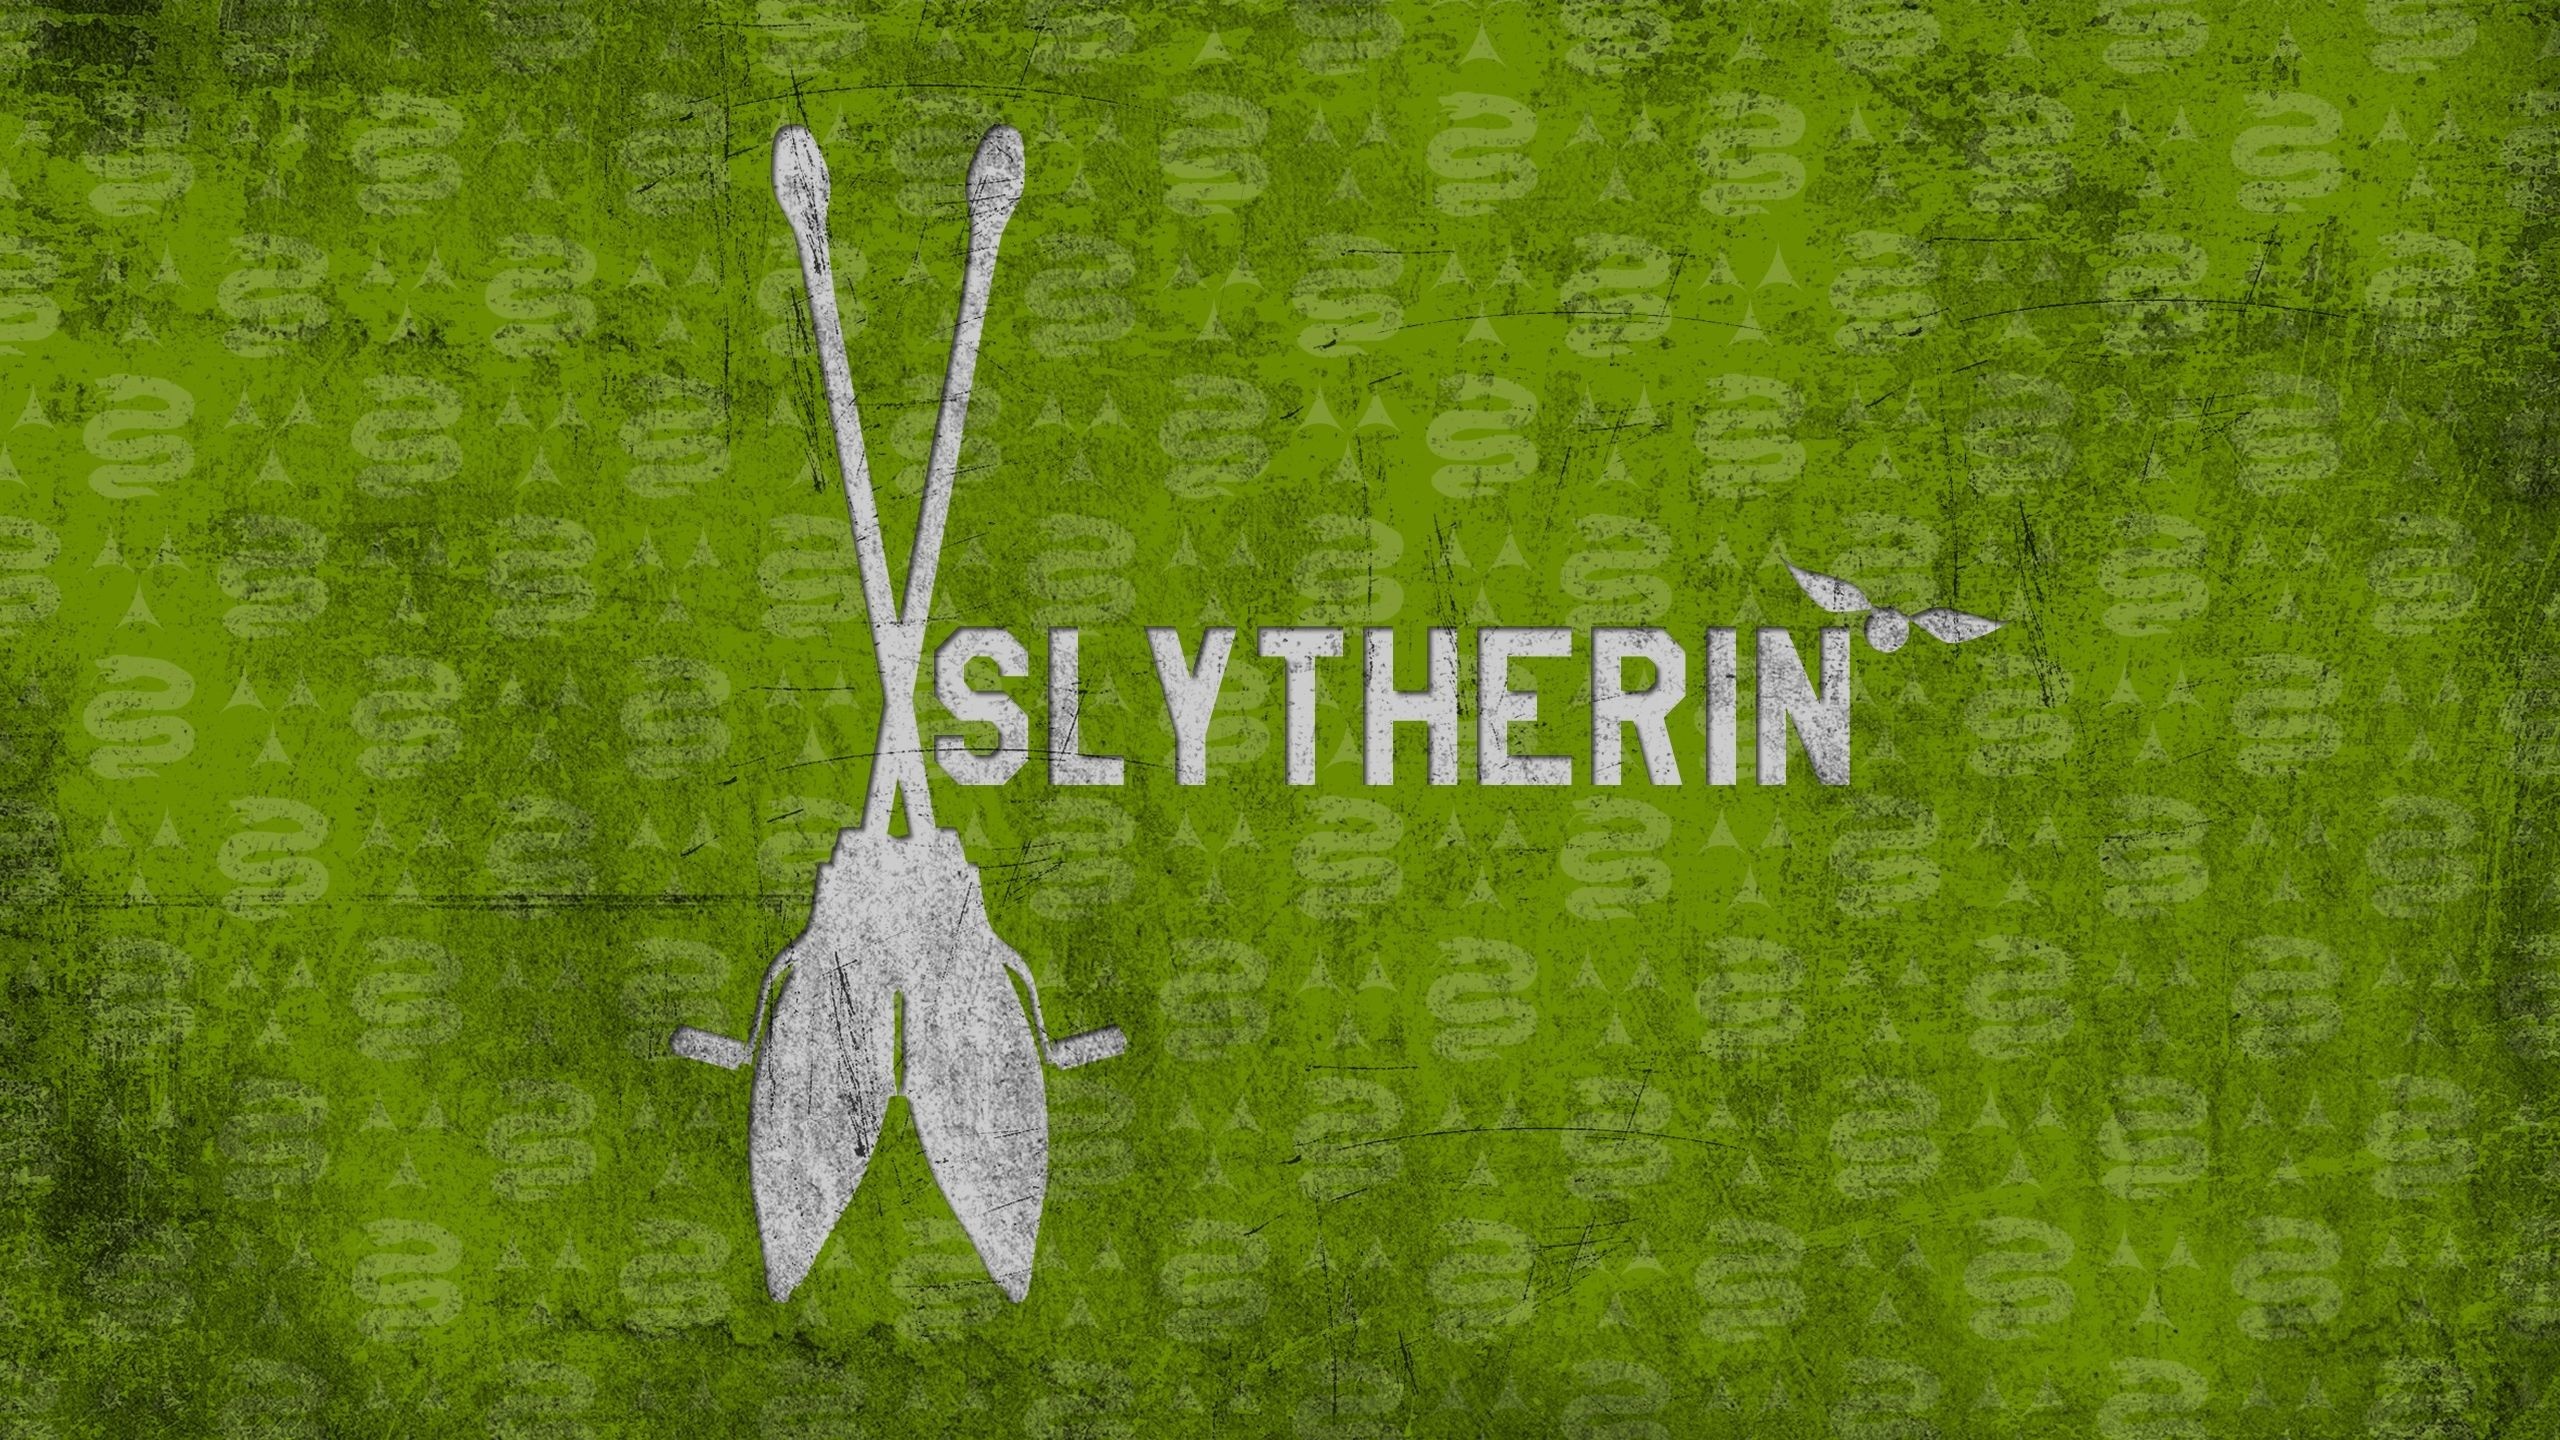 Slytherin Quidditch wallpapers, House spirit, Ambitious players, Quidditch pitch, 2560x1440 HD Desktop